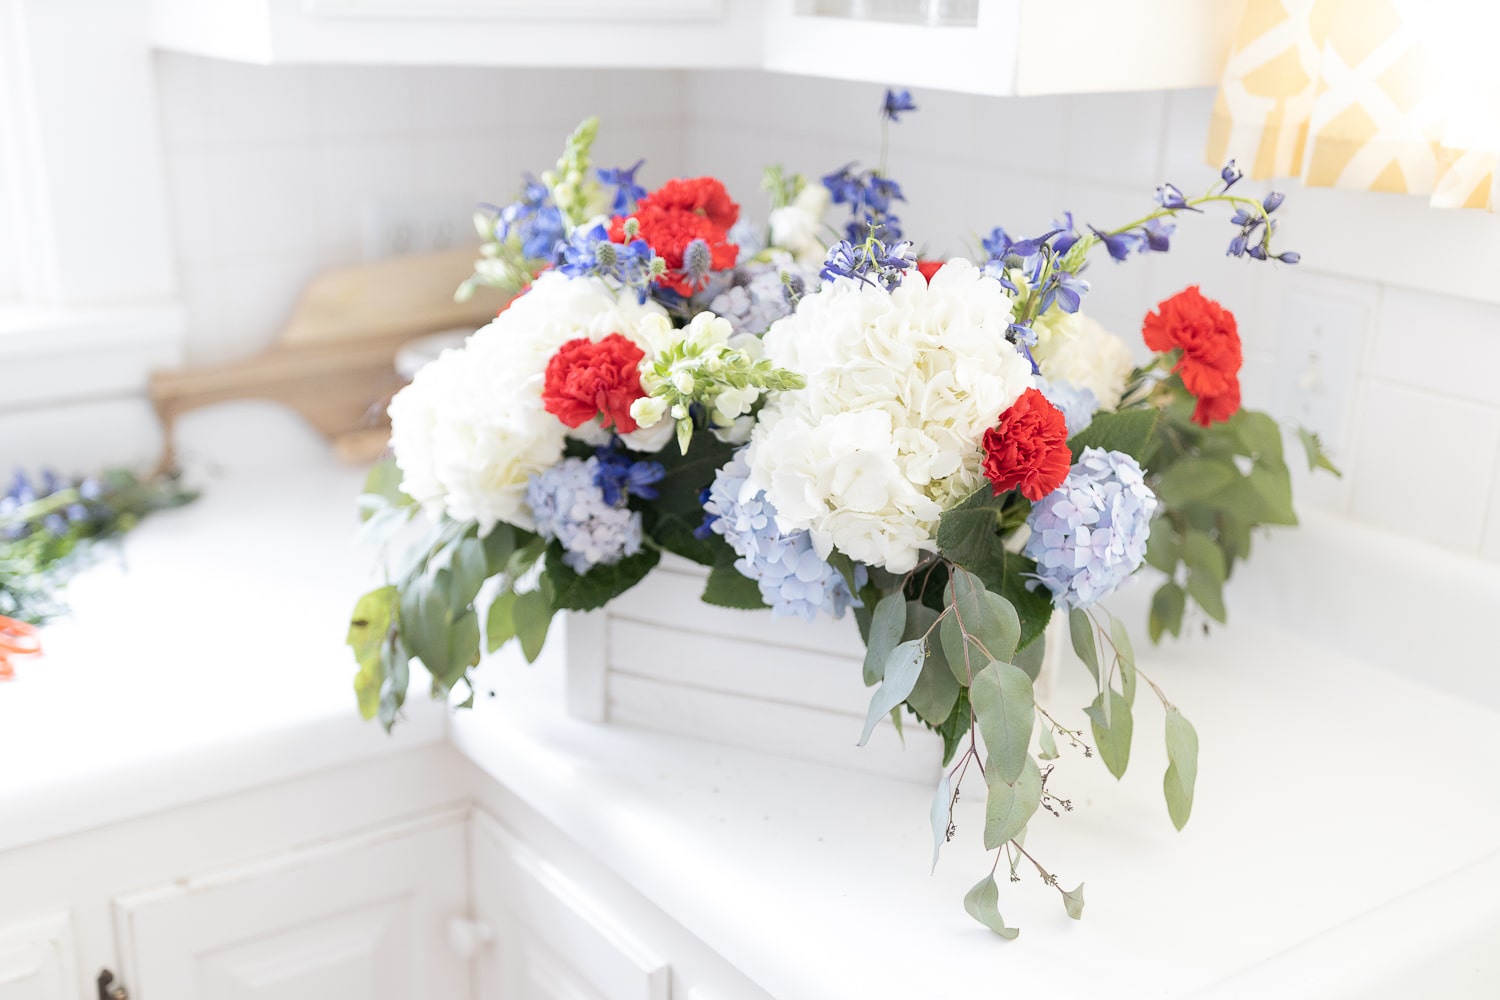 Red, white, and blue centerpiece created by entertaining blogger Stephanie Ziajka on Diary of a Debutante